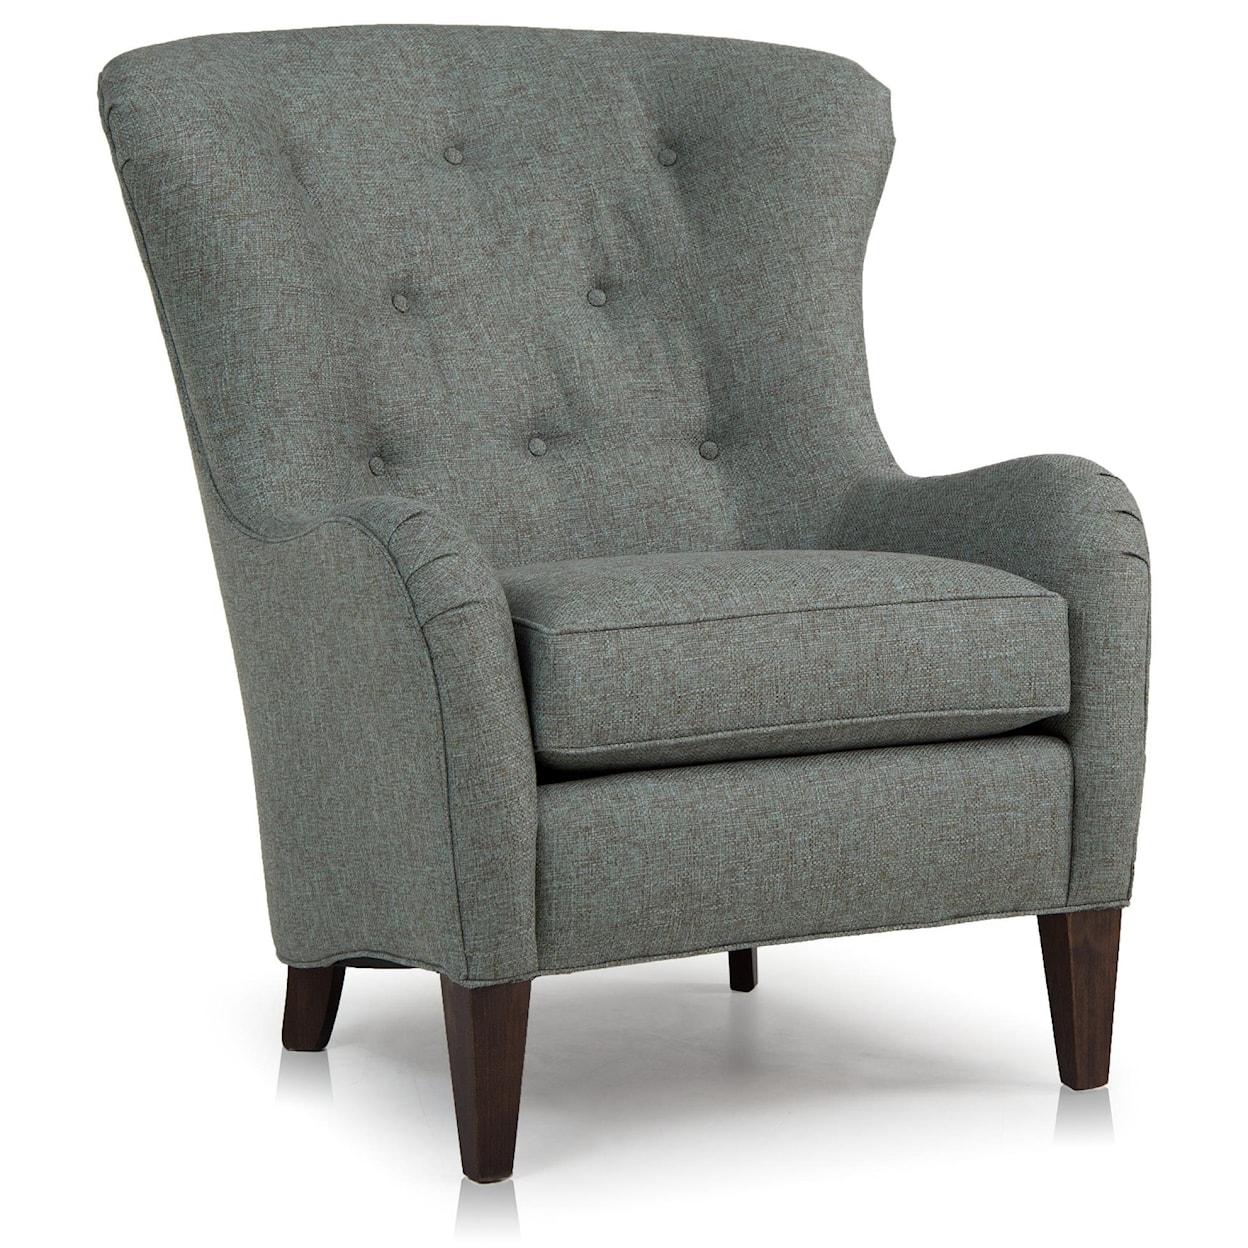 Smith Brothers Bianco Wing Back Chair